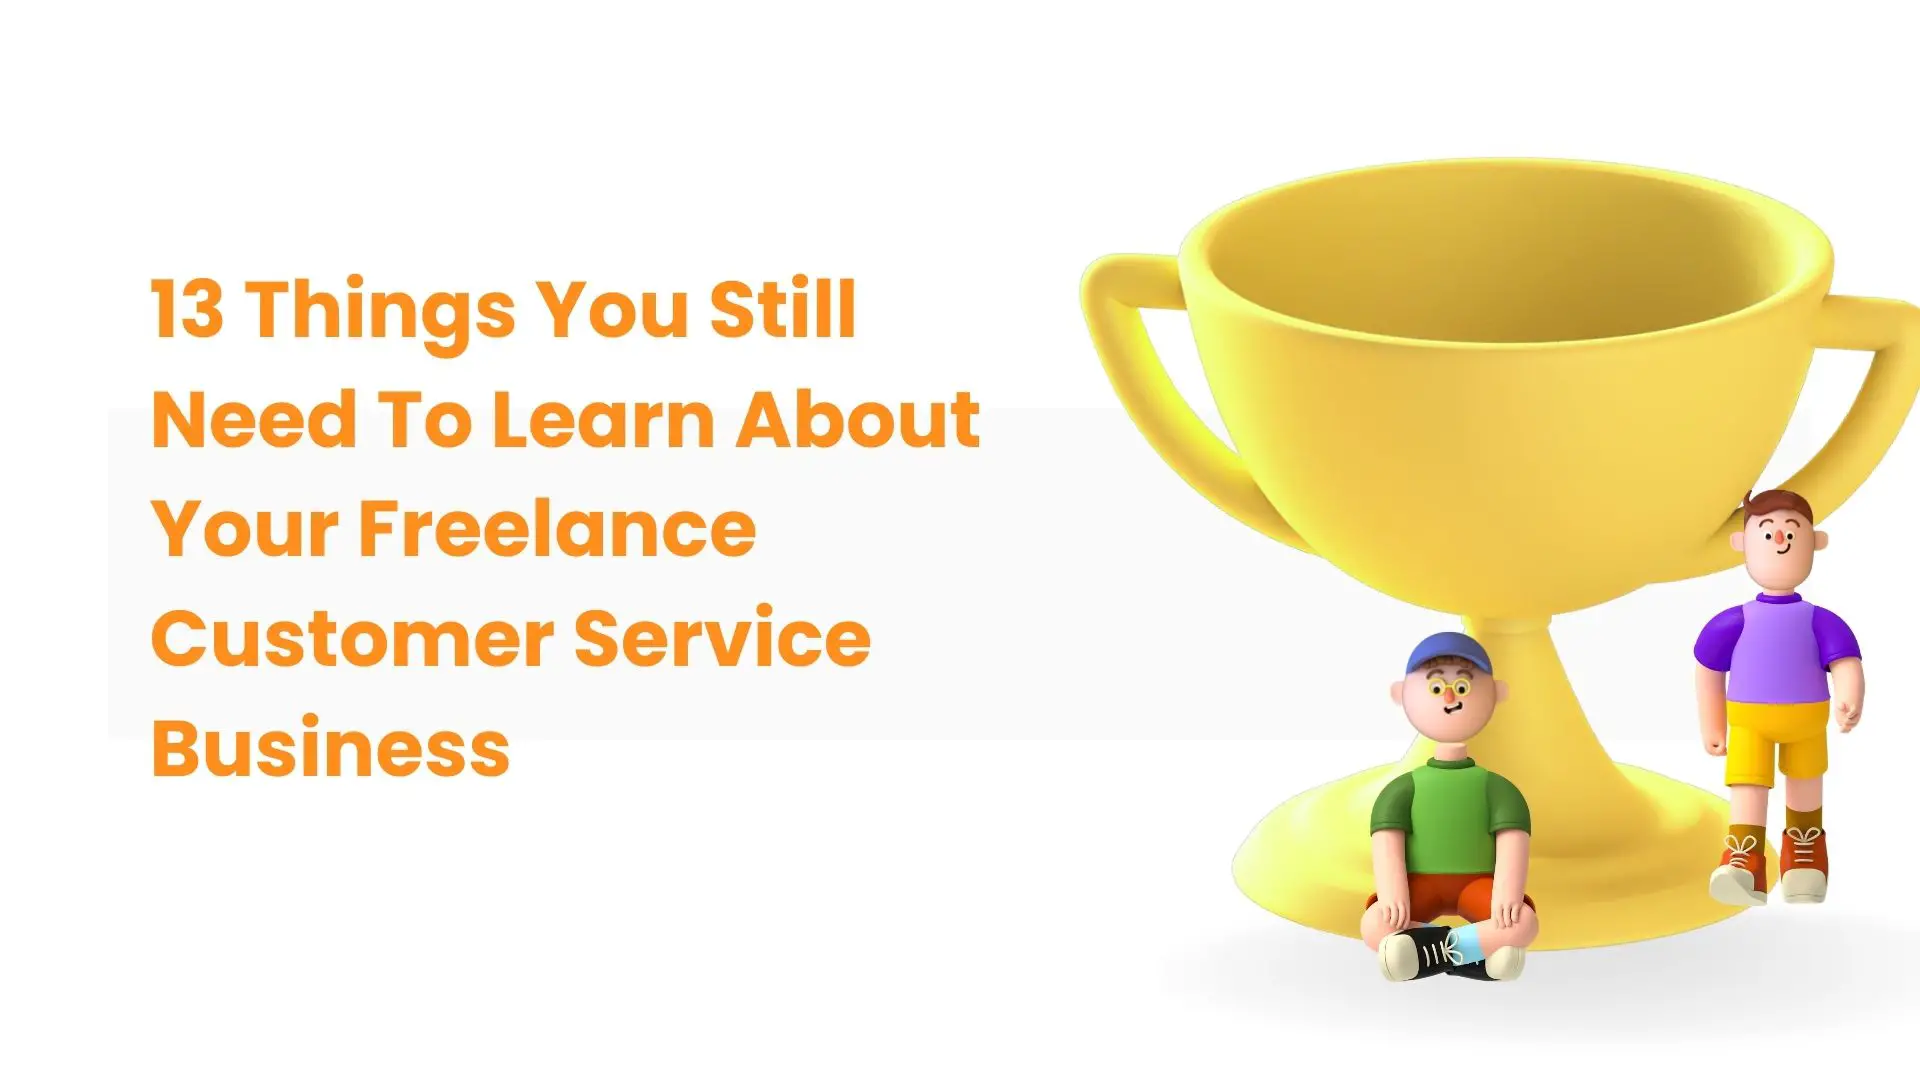 13 Things You Still Need To Learn About Your Freelance Customer Service Business